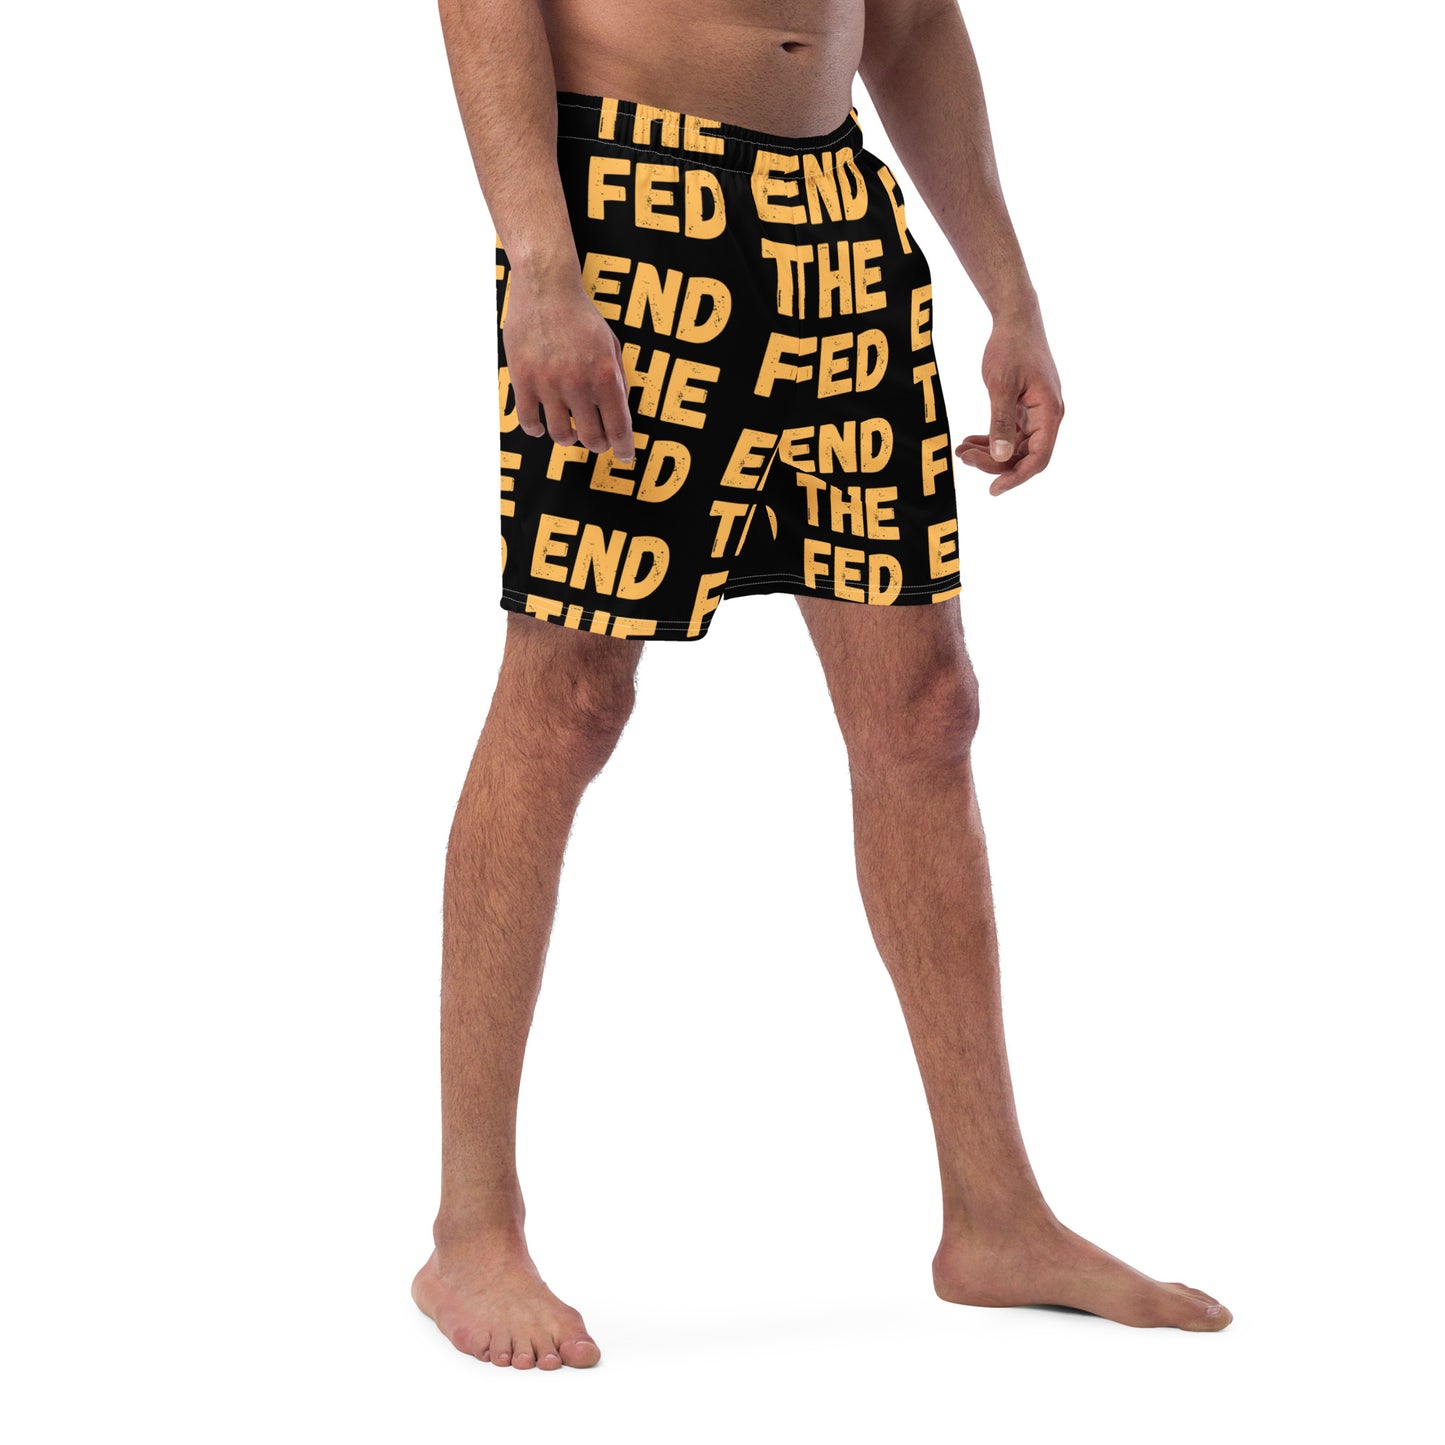 Make a Statement at the Beach with "End the Fed" Men's Swimming Trunks